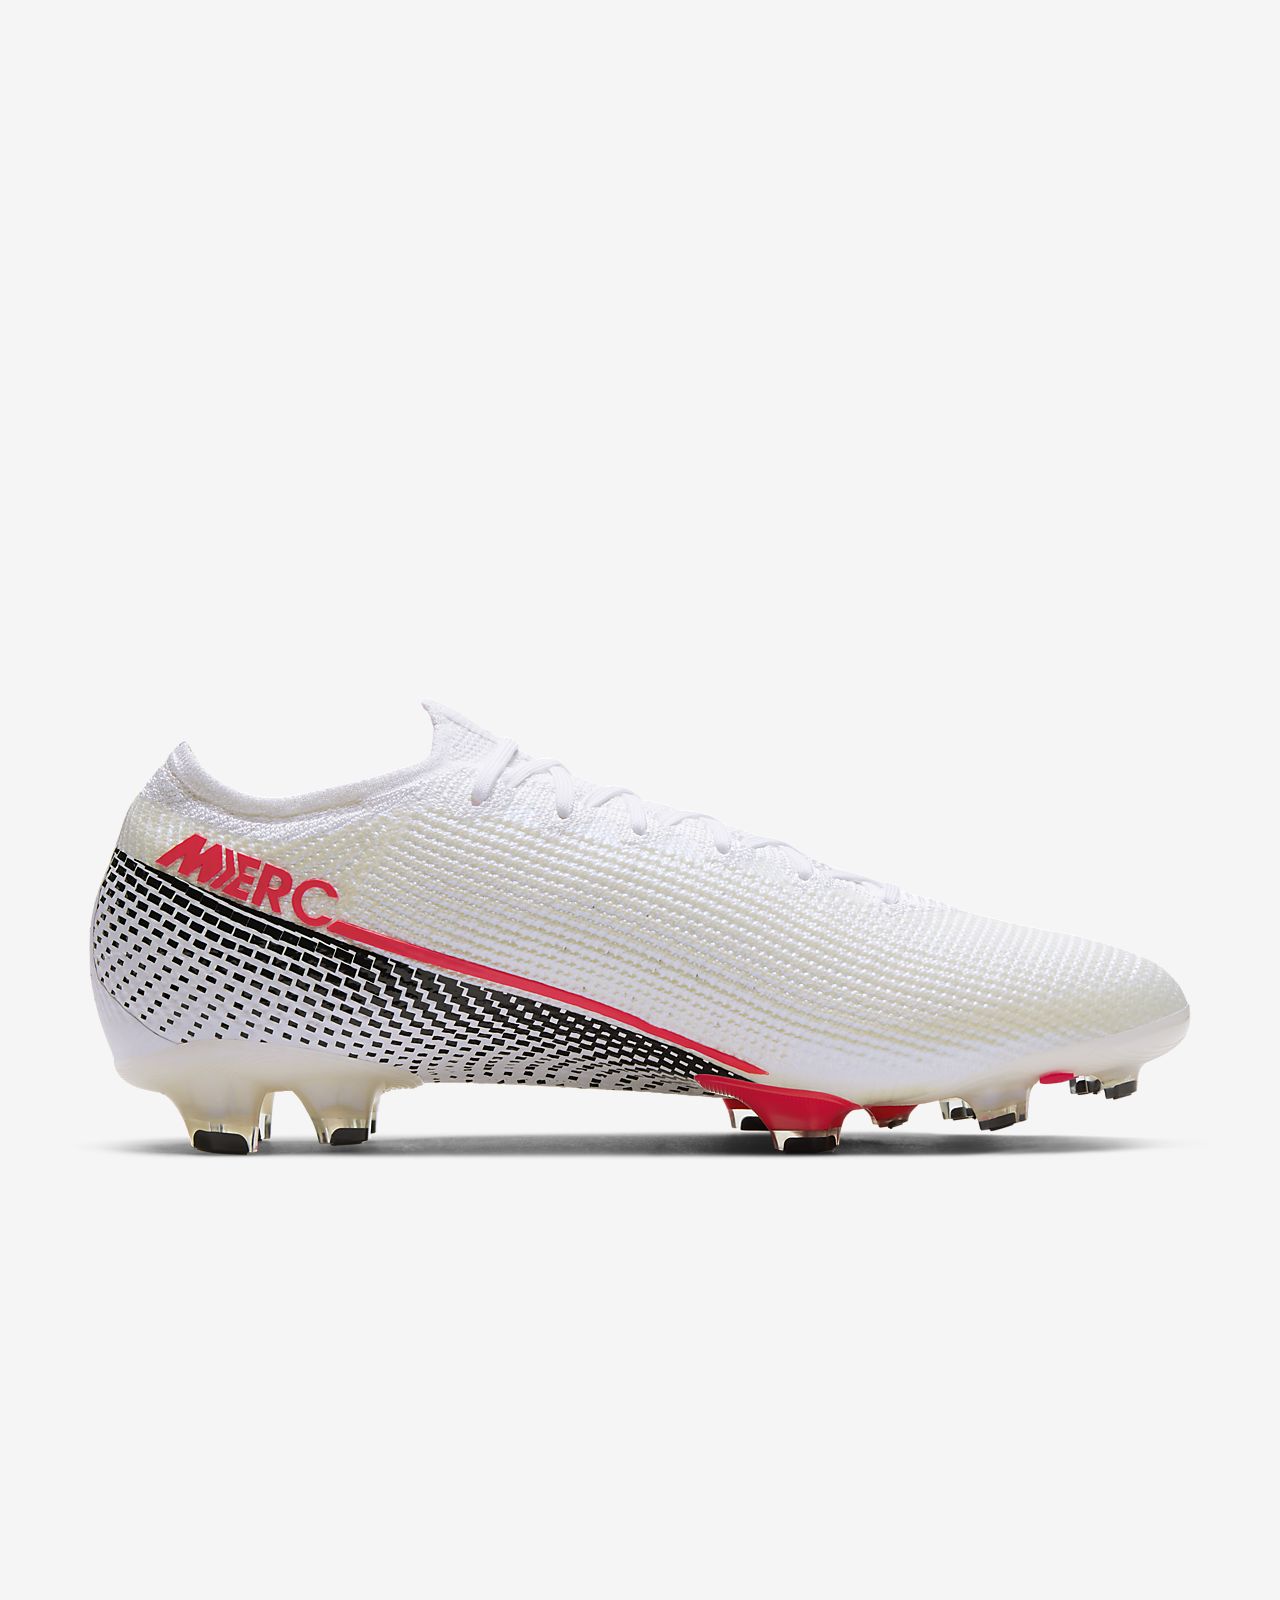 Football Boots Nike Mercurial Vapor XIII Pro MDS 2 AG PRO.